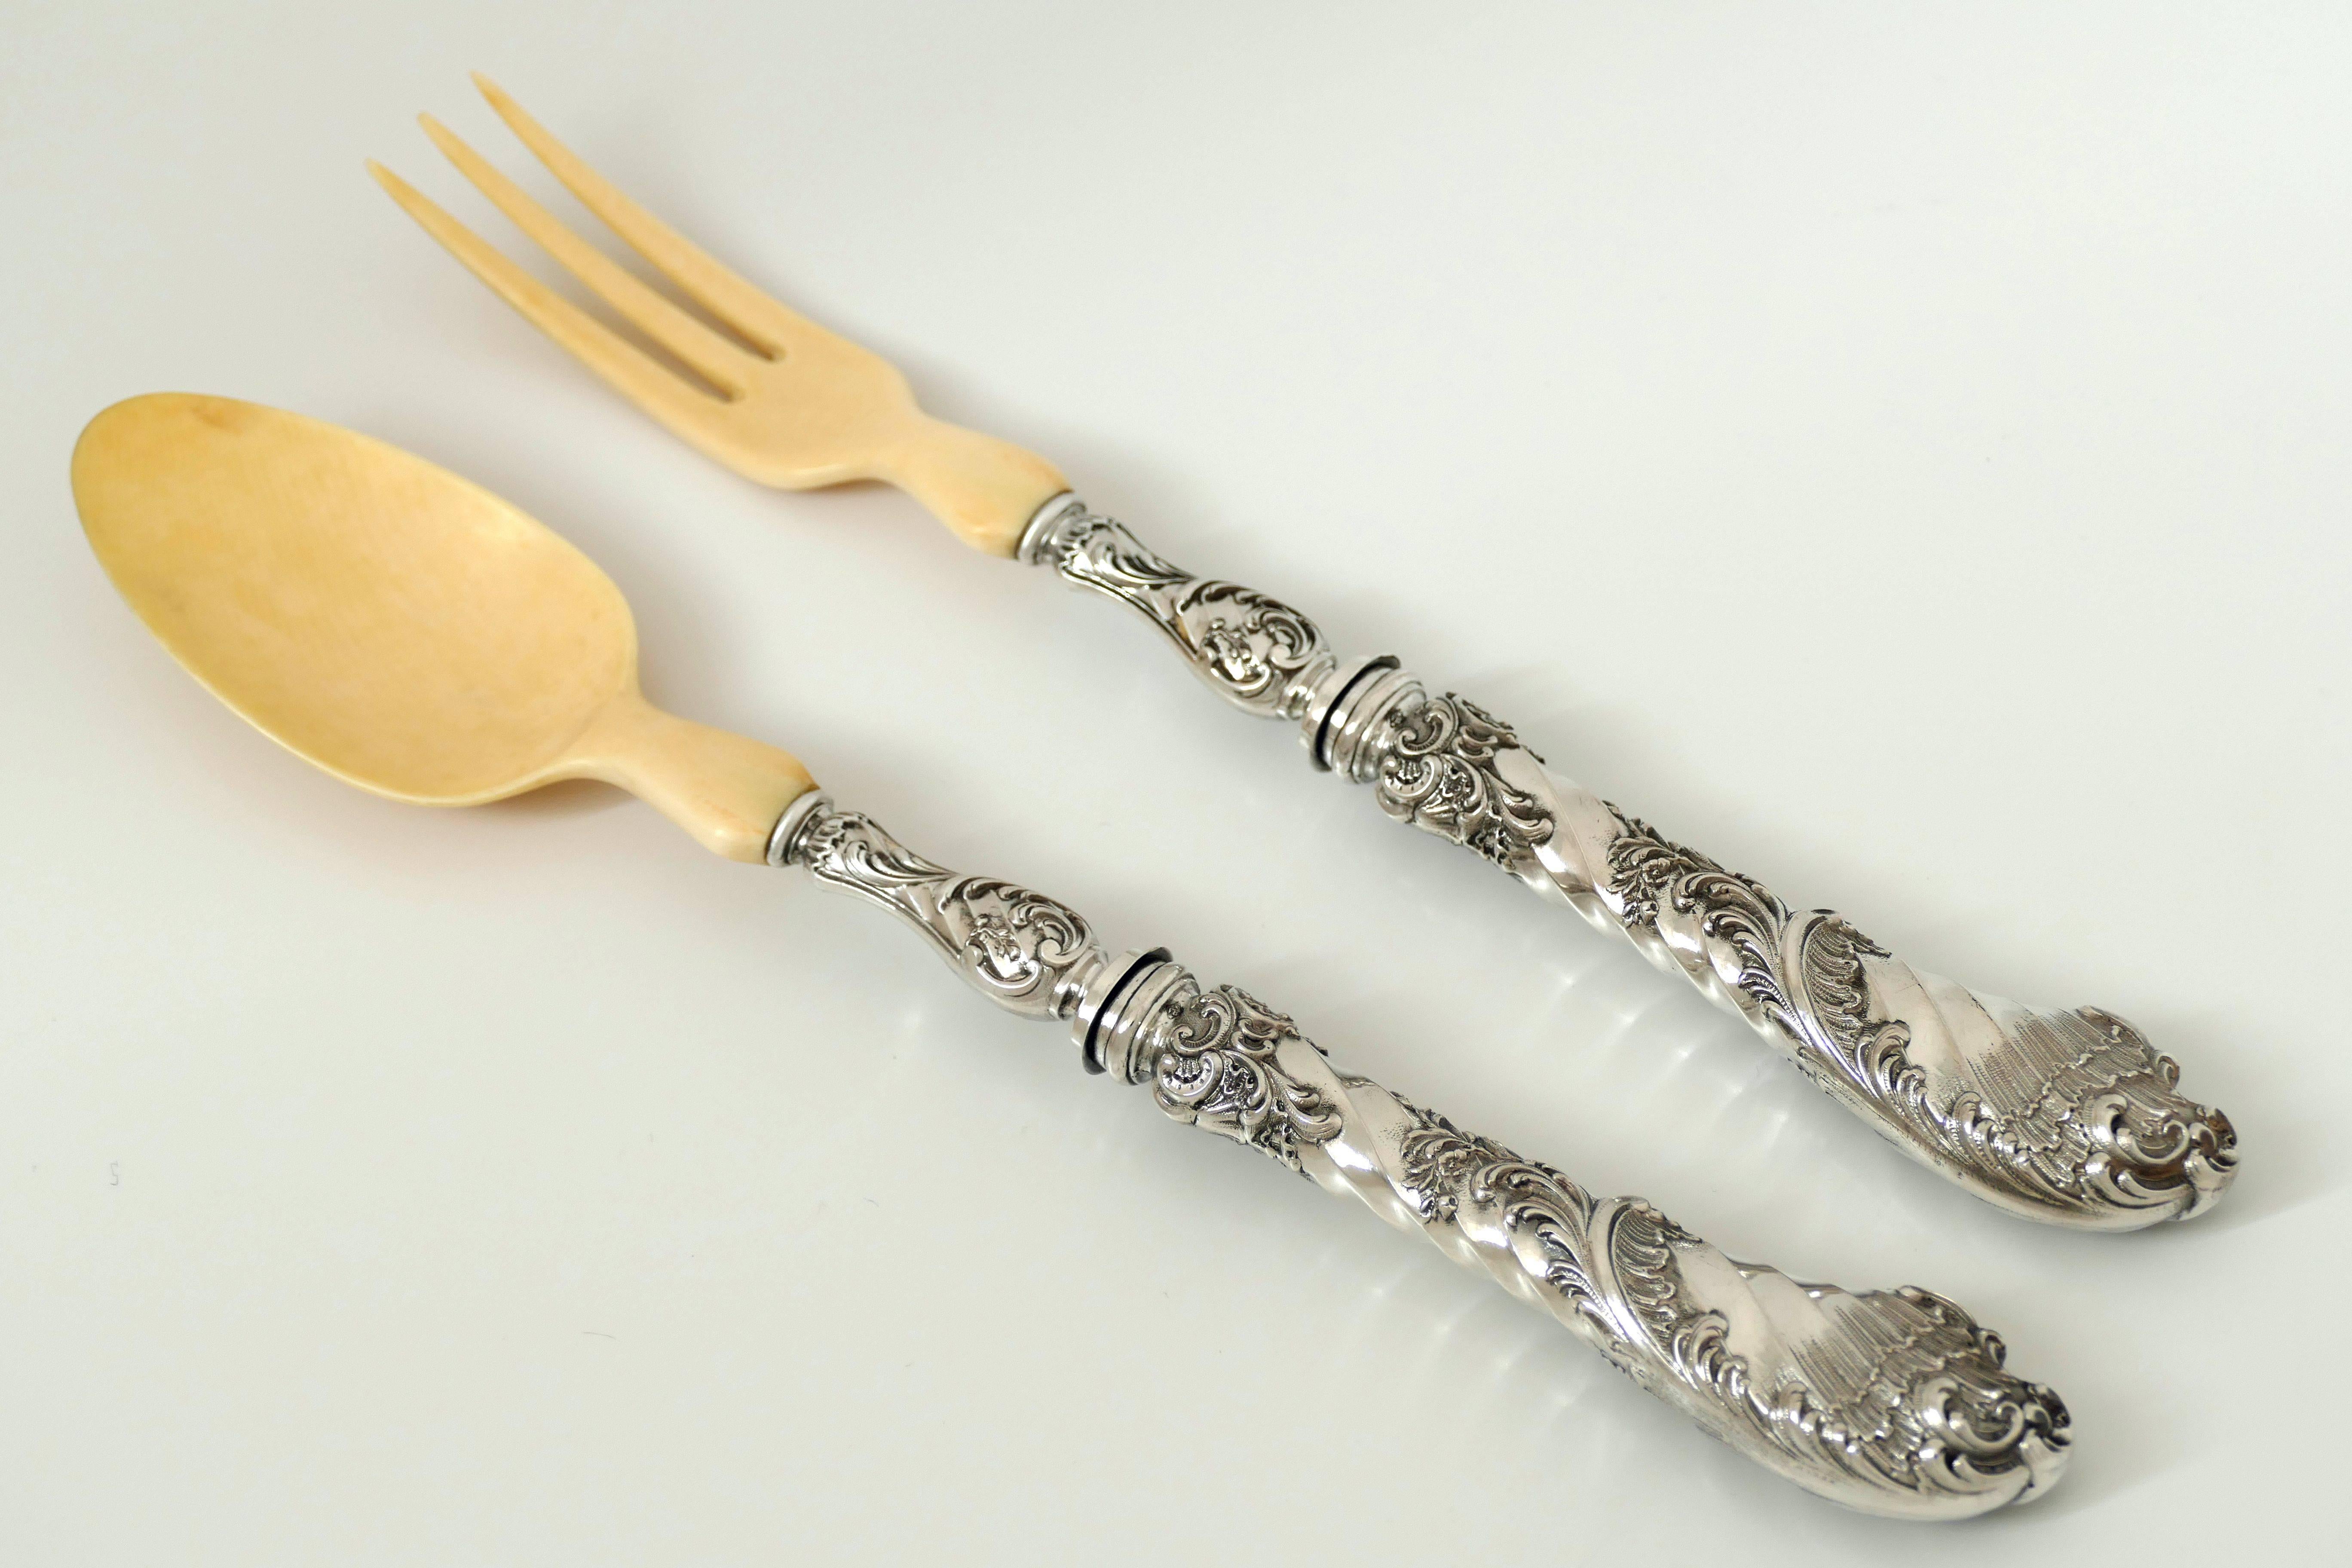 Boivin French Sterling Silver Serving Implement Set 4 Pc, Original box, Rococo For Sale 2